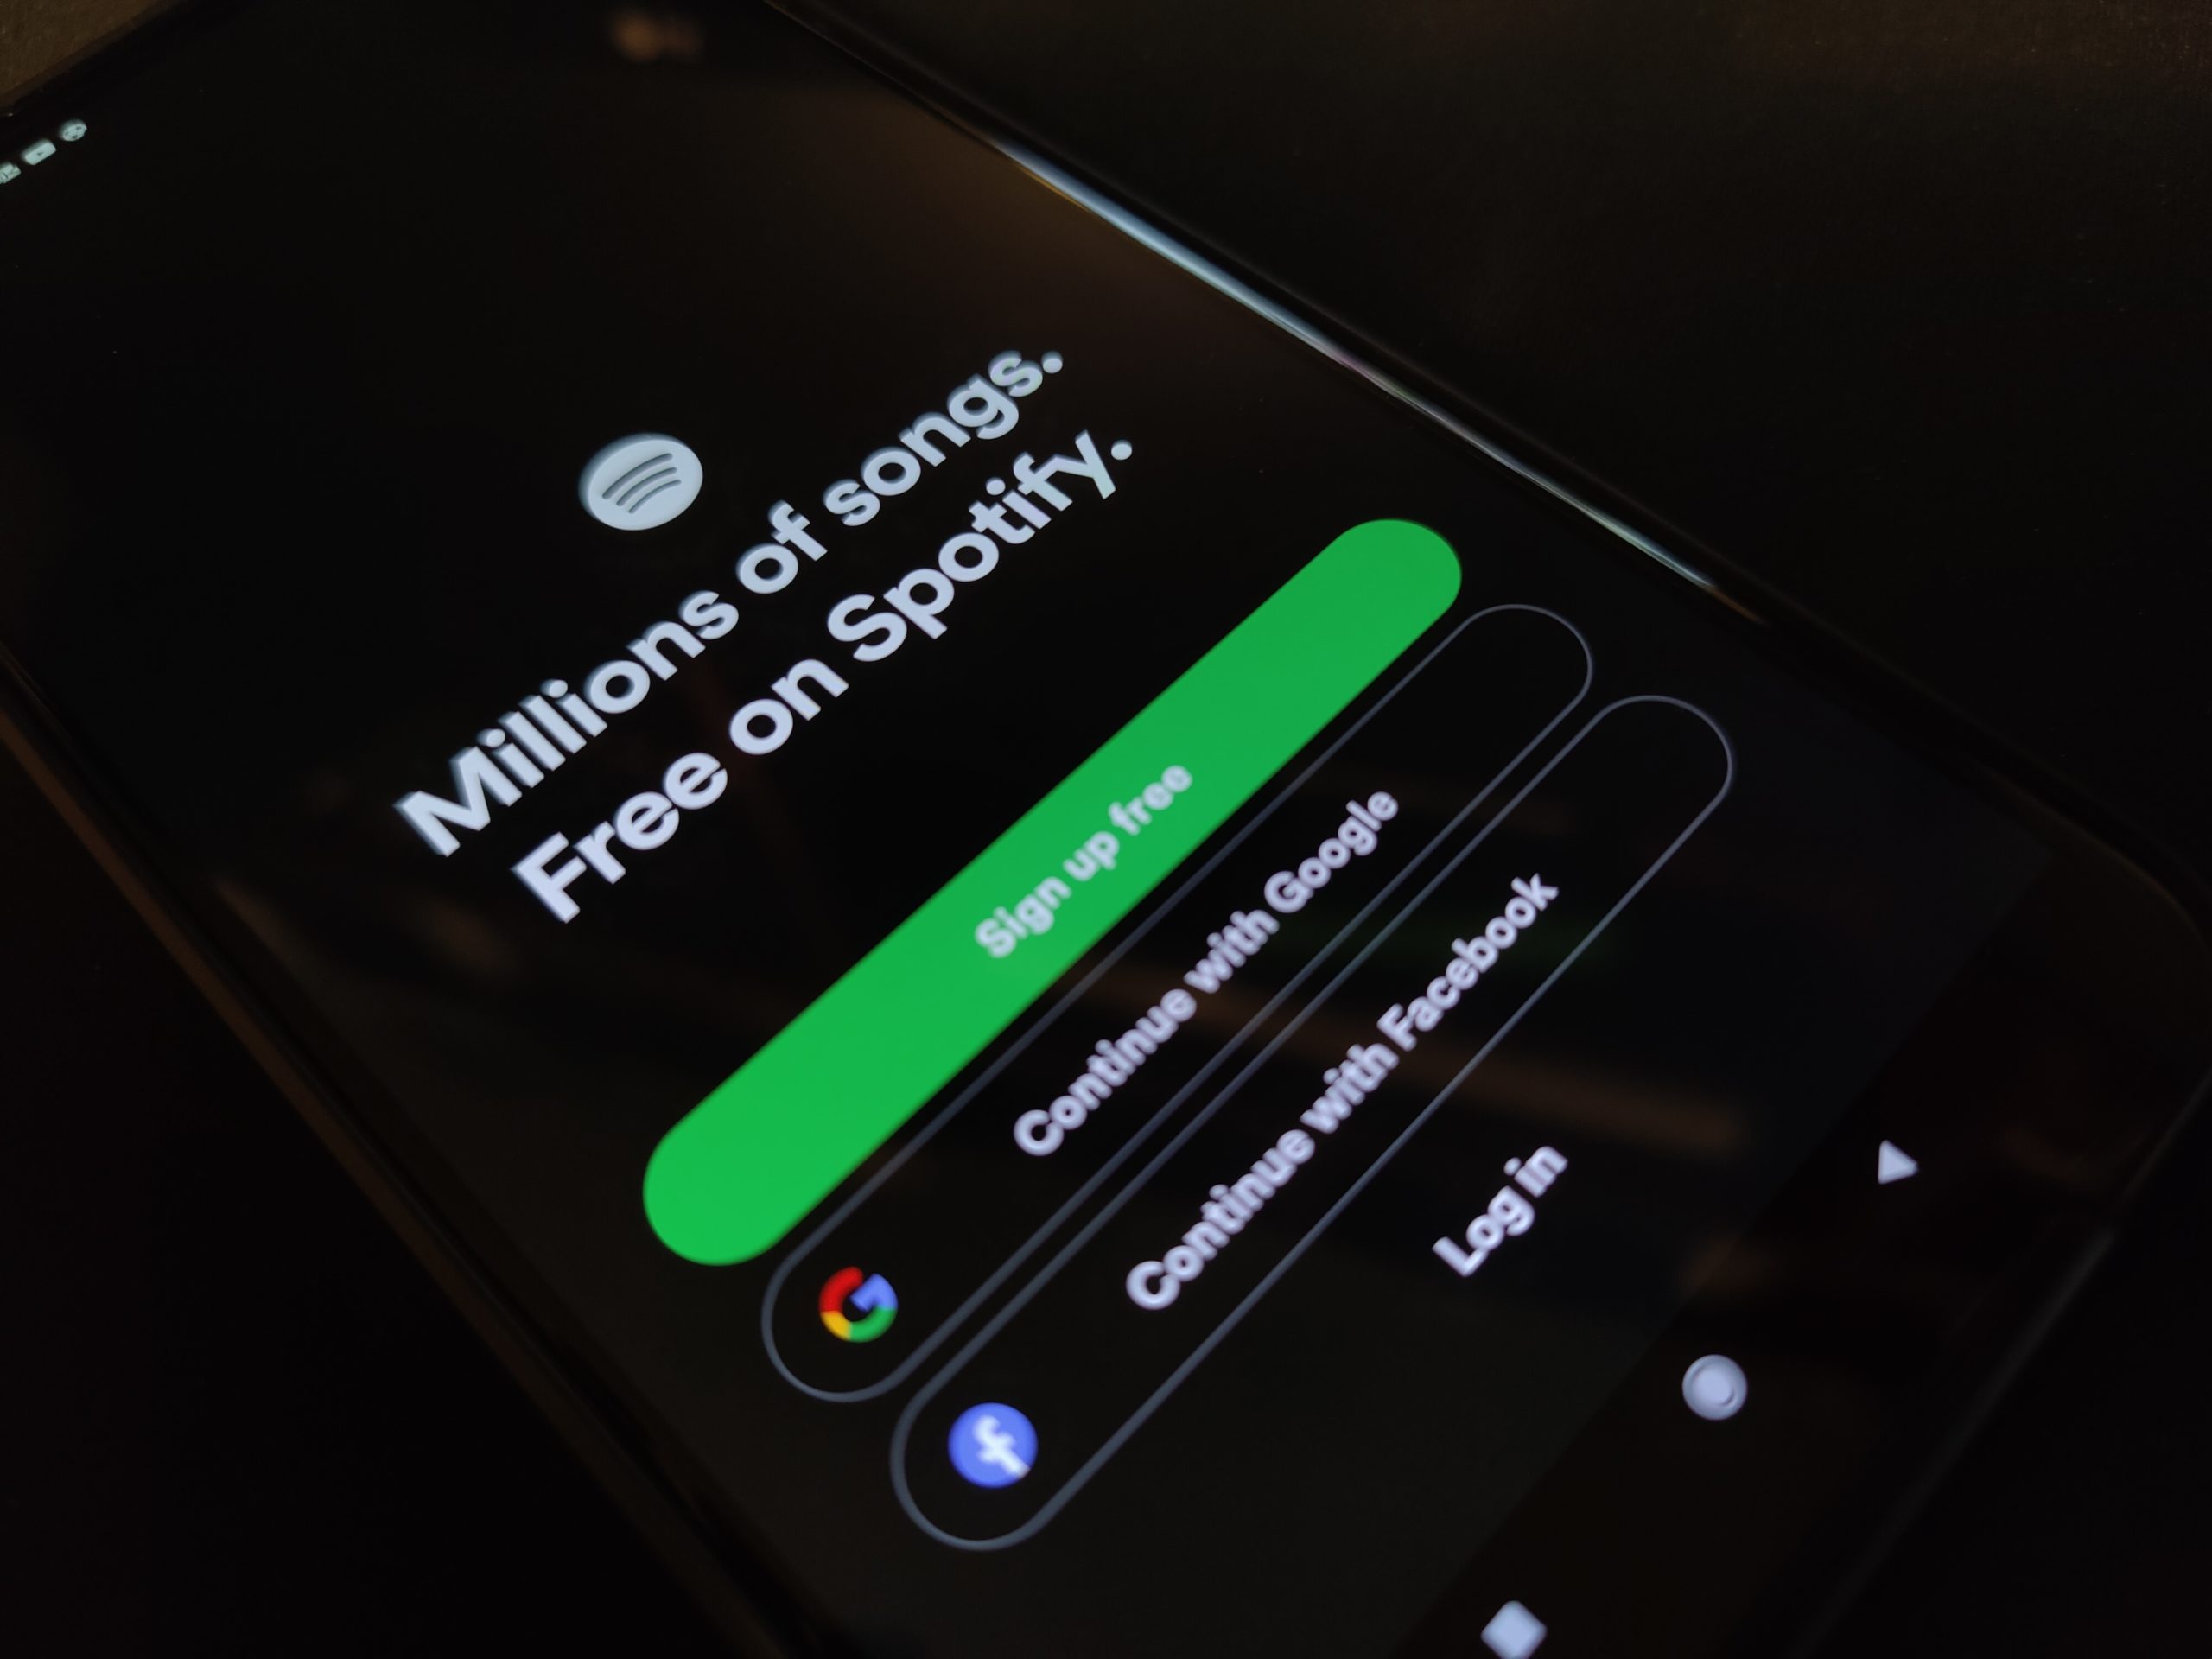 cant log into spotify on phone